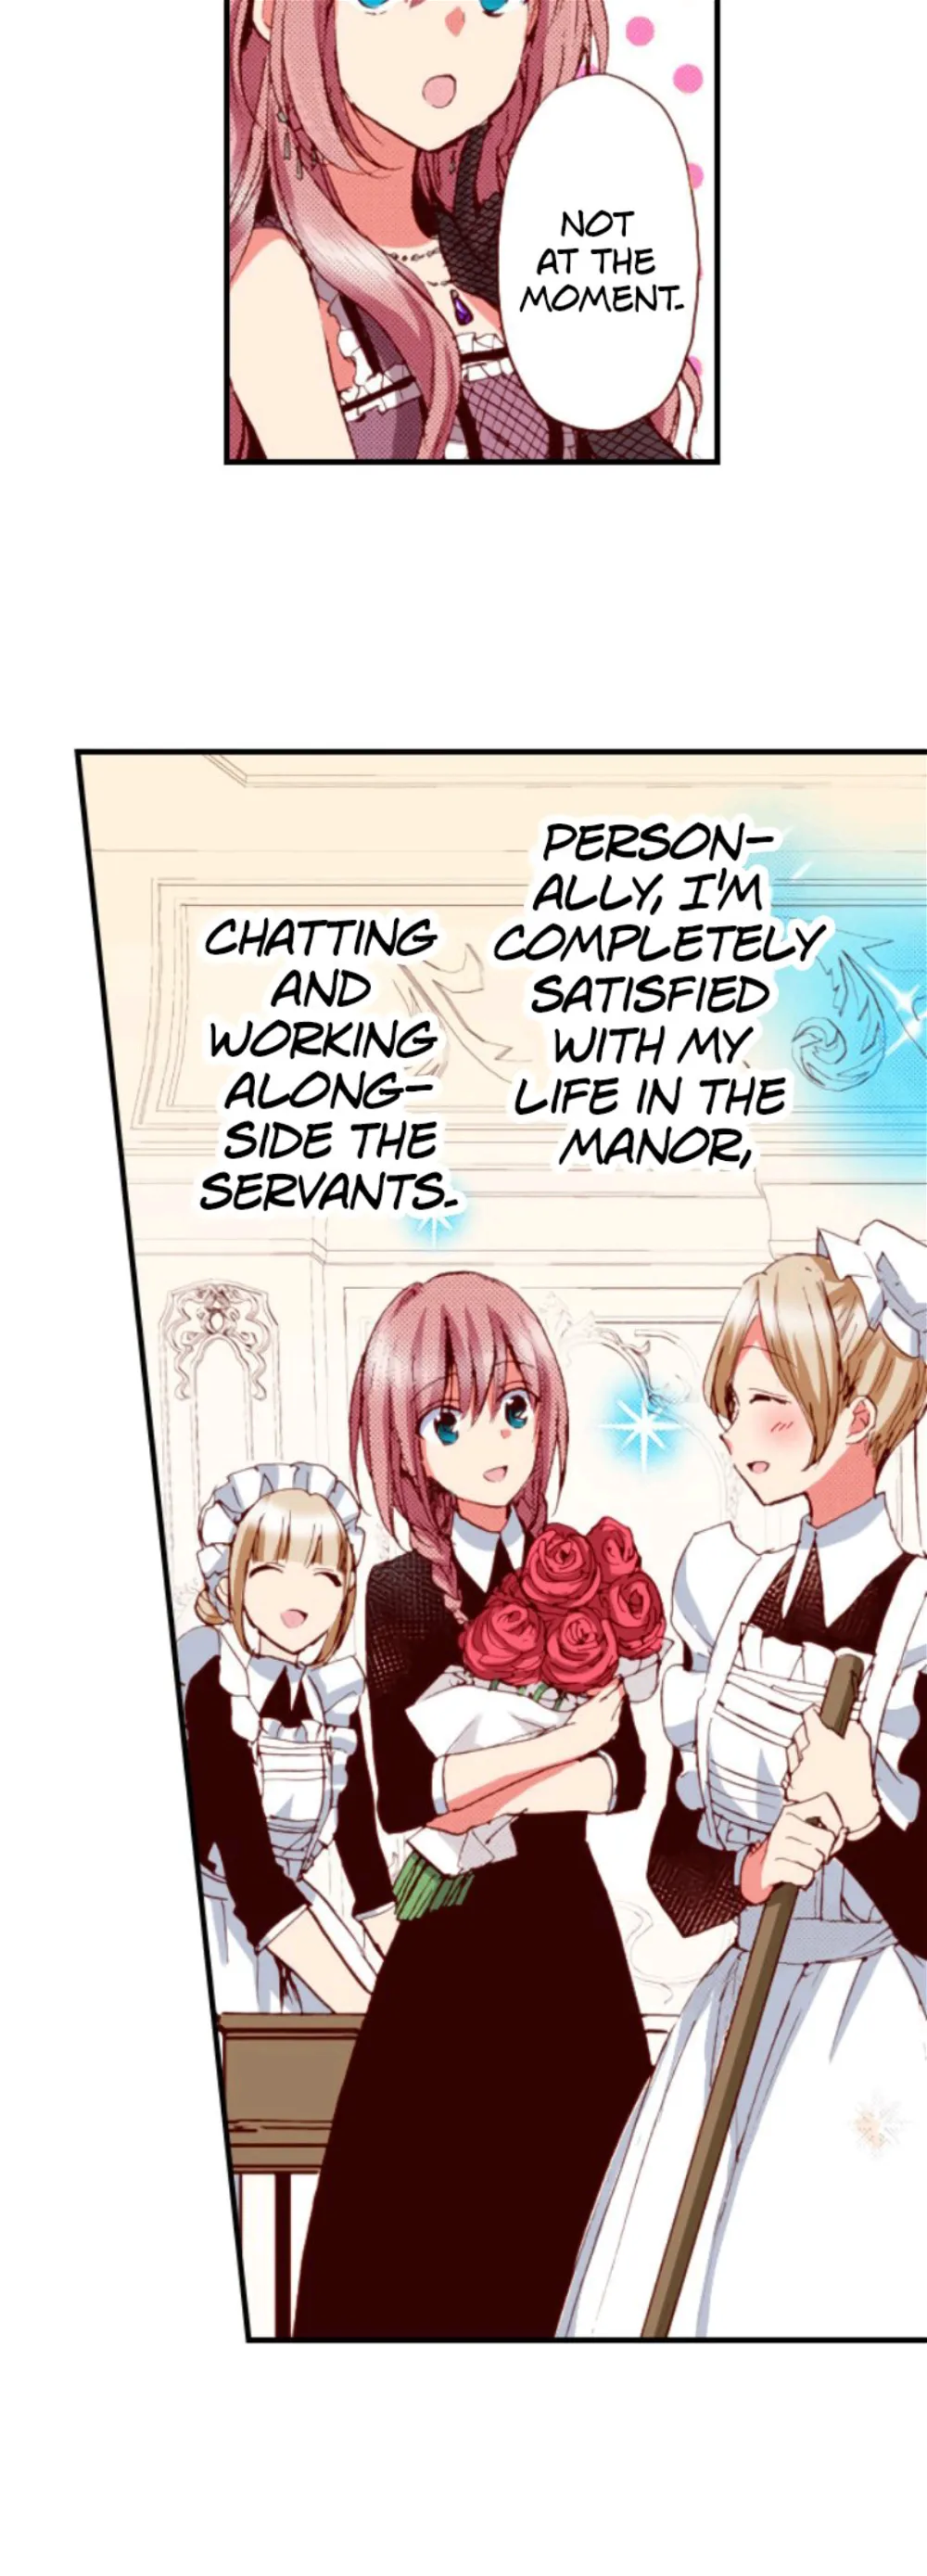 Somebody Please Explain What’s Going On Here! ~A Wedding that Began With a Contract~ chapter 23